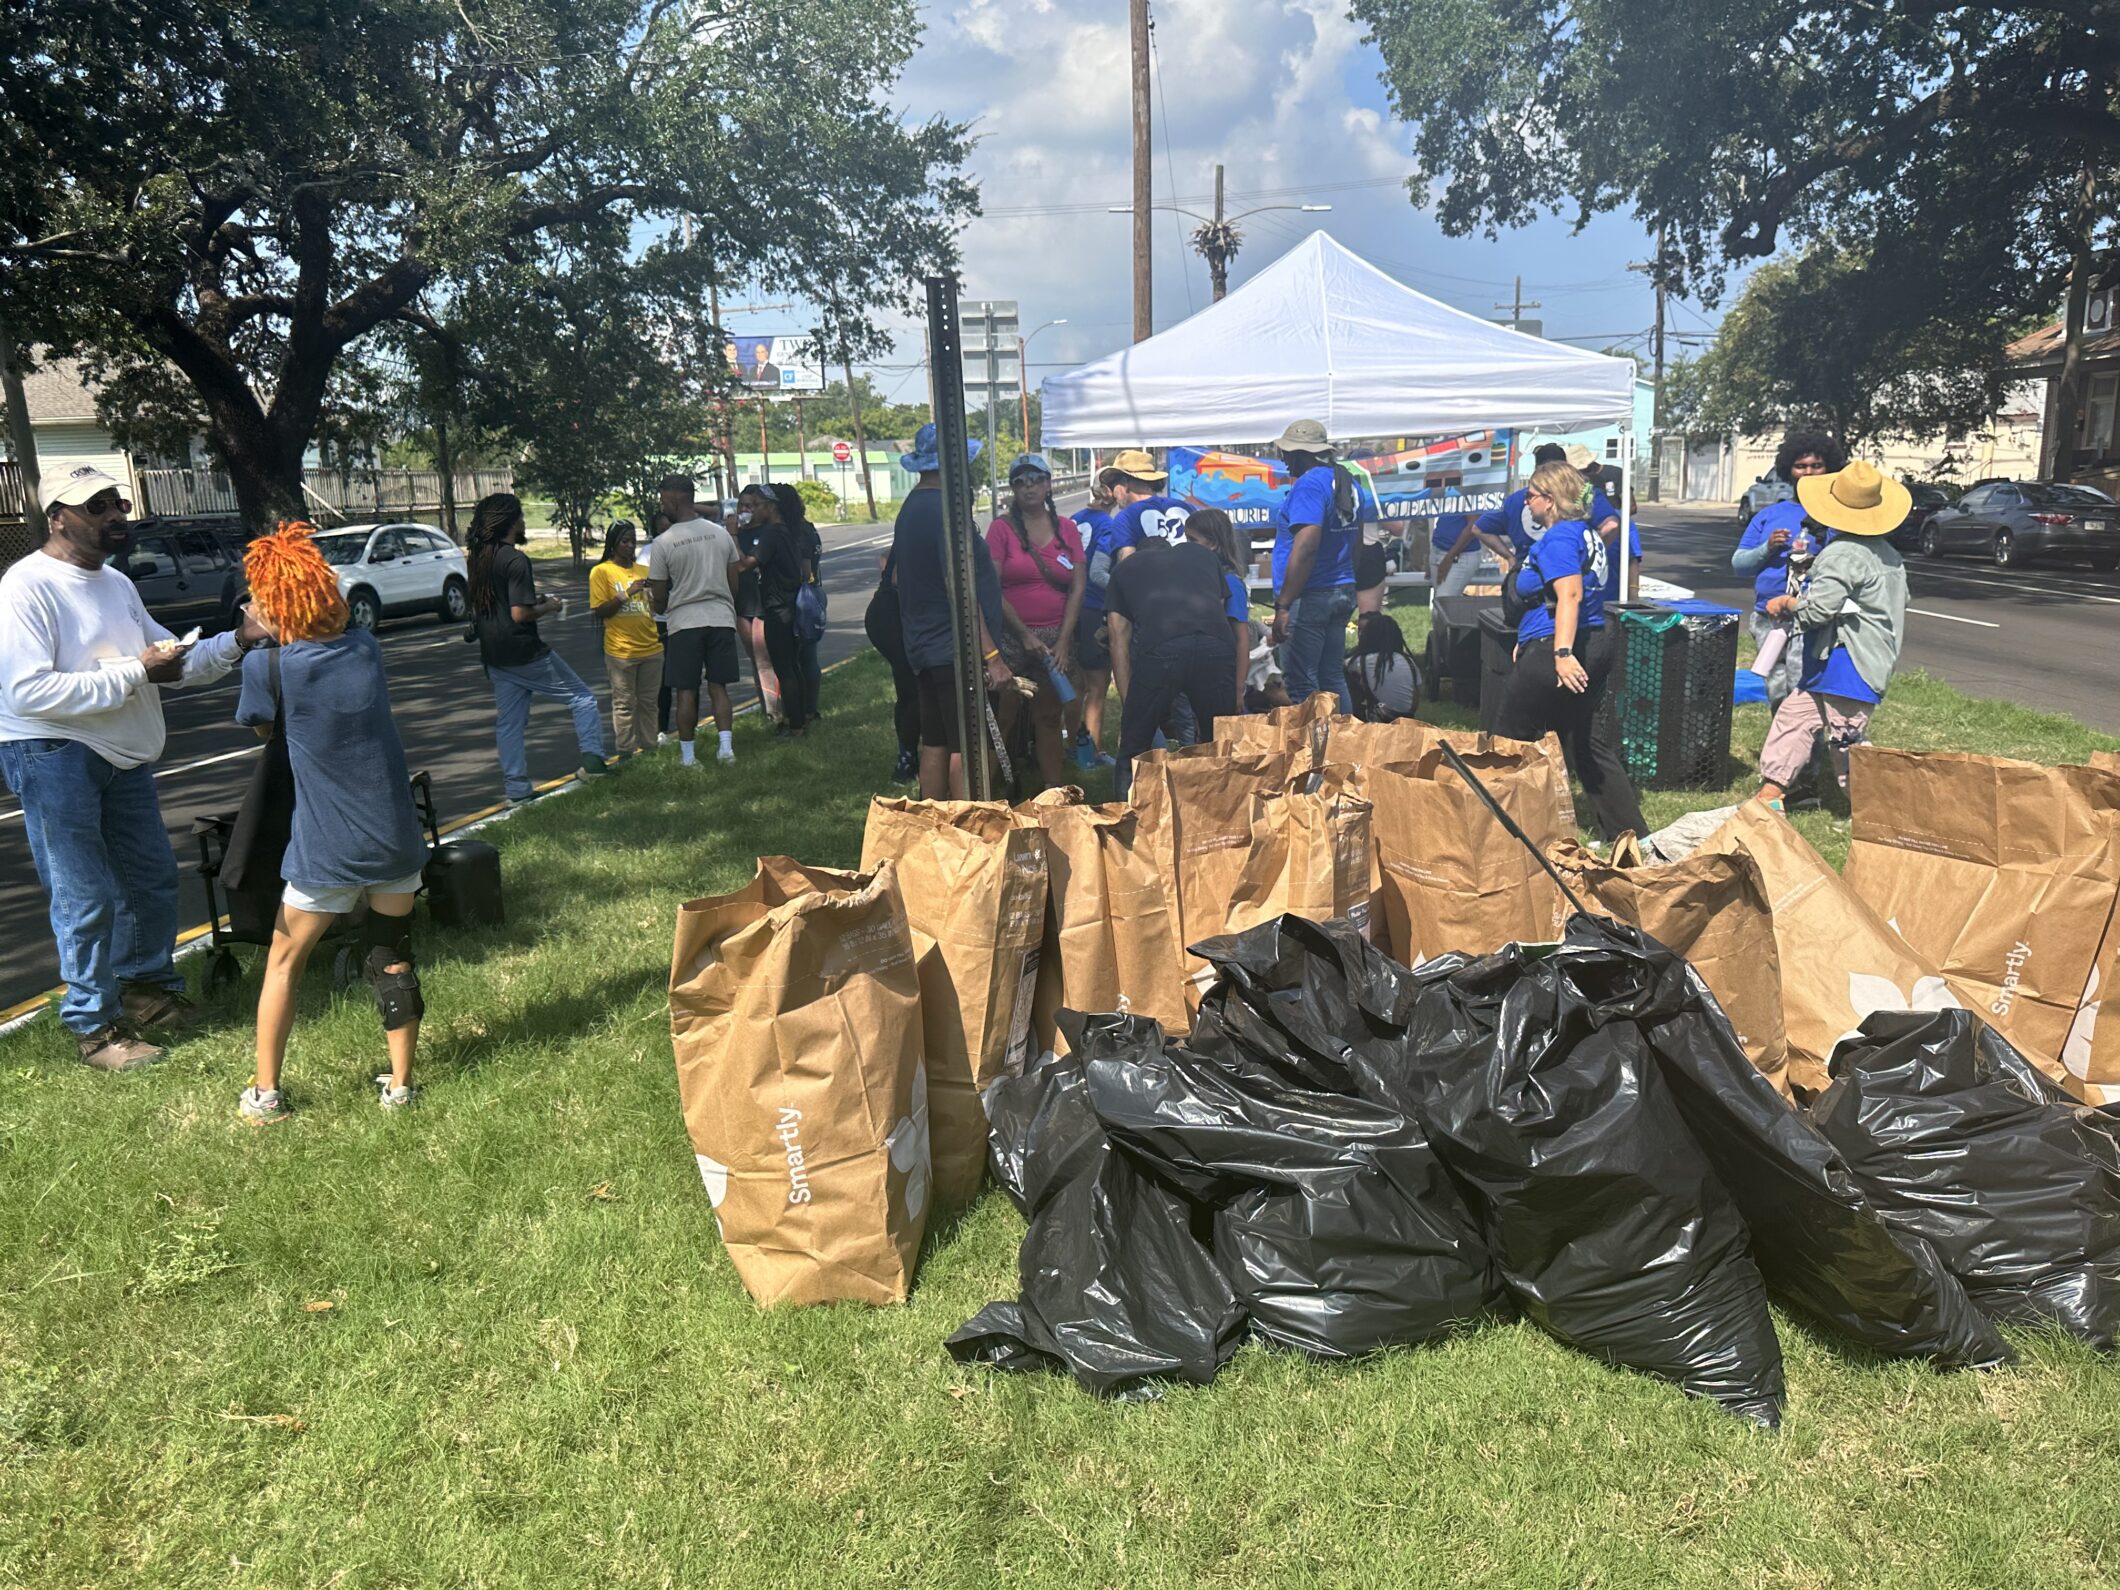 Culture of Cleanliness Hosts World Cleanup Day Event in Lower 9th Ward